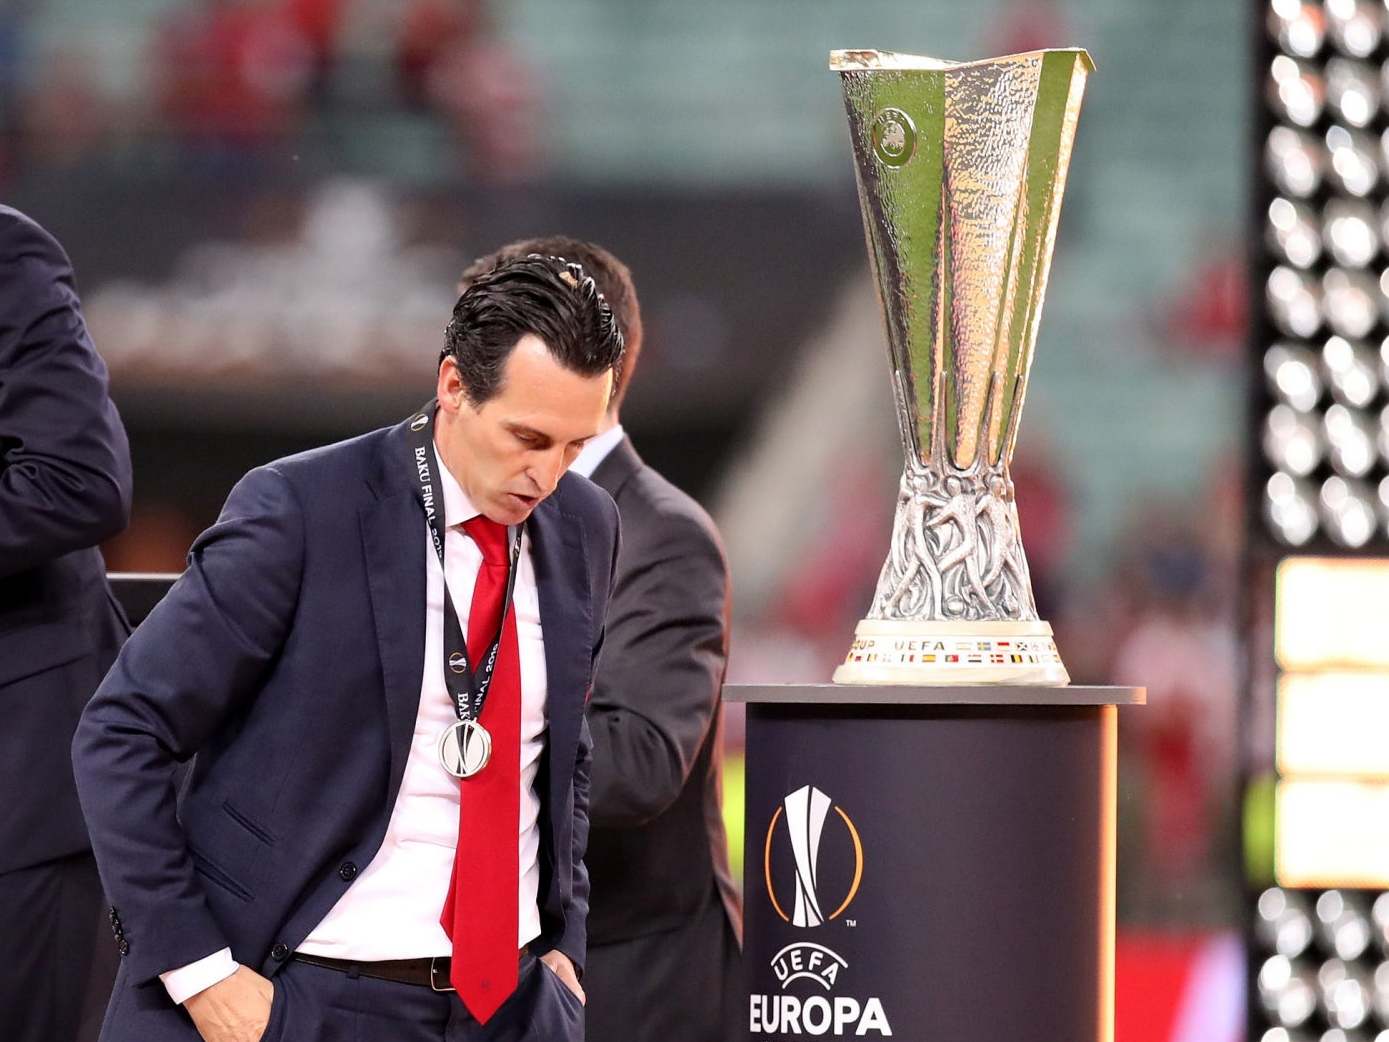 Unai Emery walks away after losing heavily to Chelsea in the final